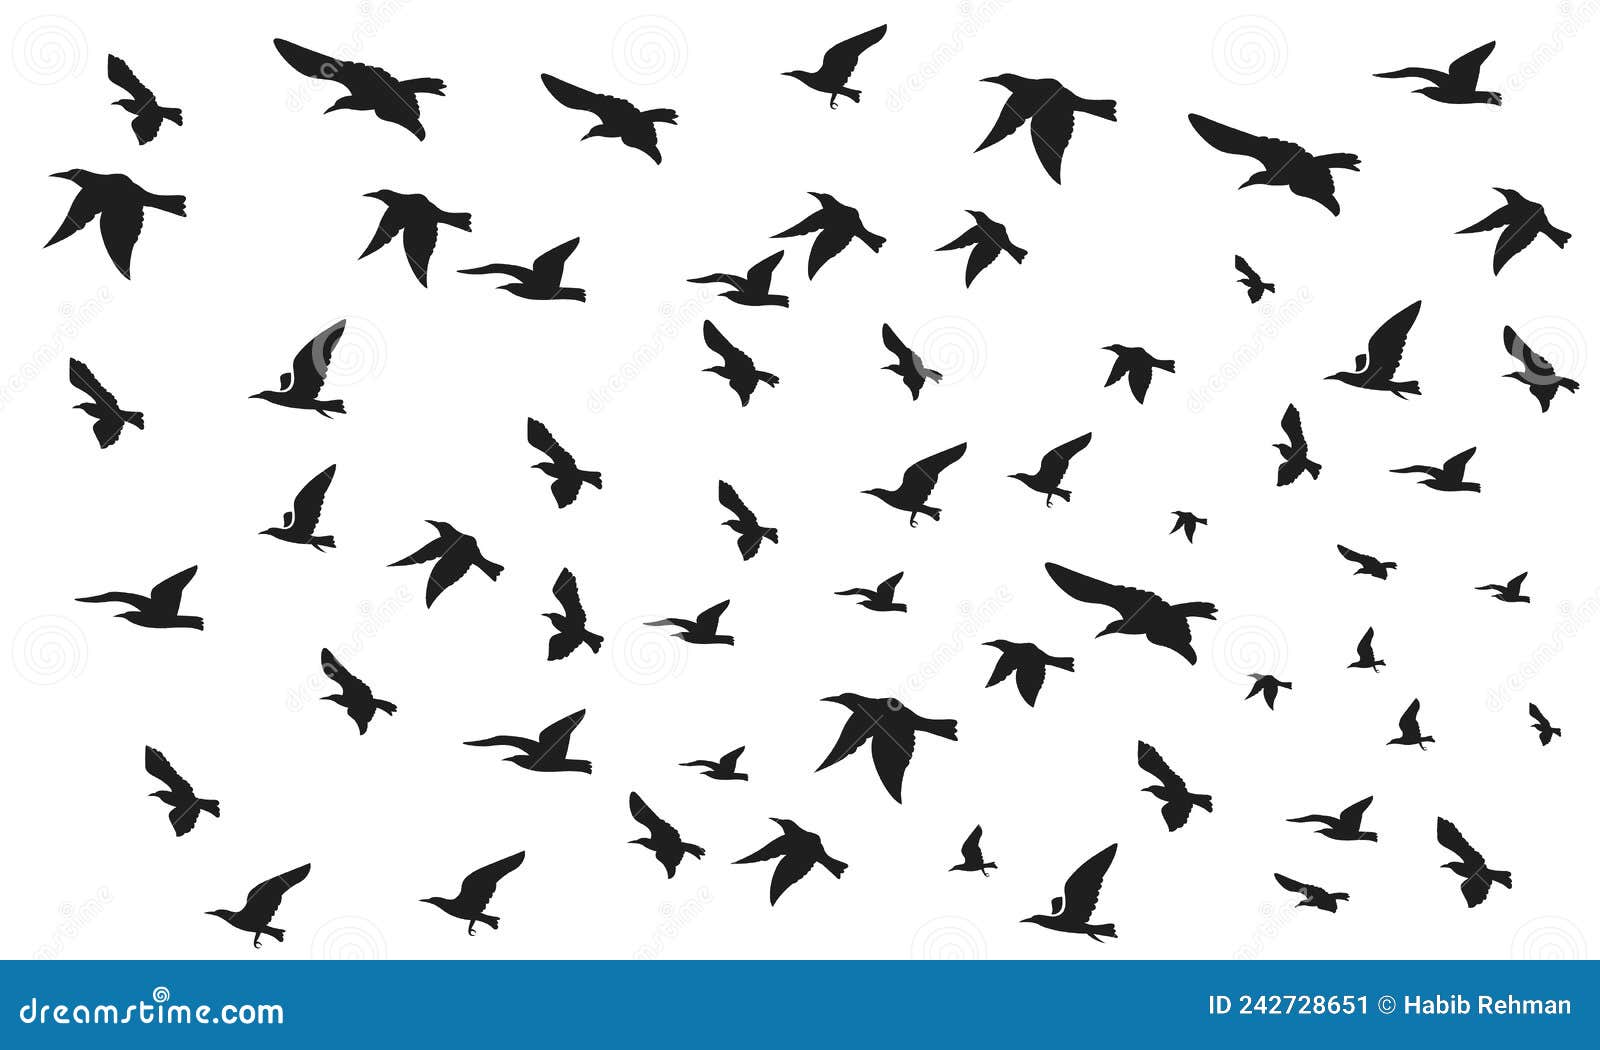 Silhouette Flock Crows Tattoo Stock Illustrations – 14 Silhouette Flock Crows  Tattoo Stock Illustrations, Vectors & Clipart - Dreamstime